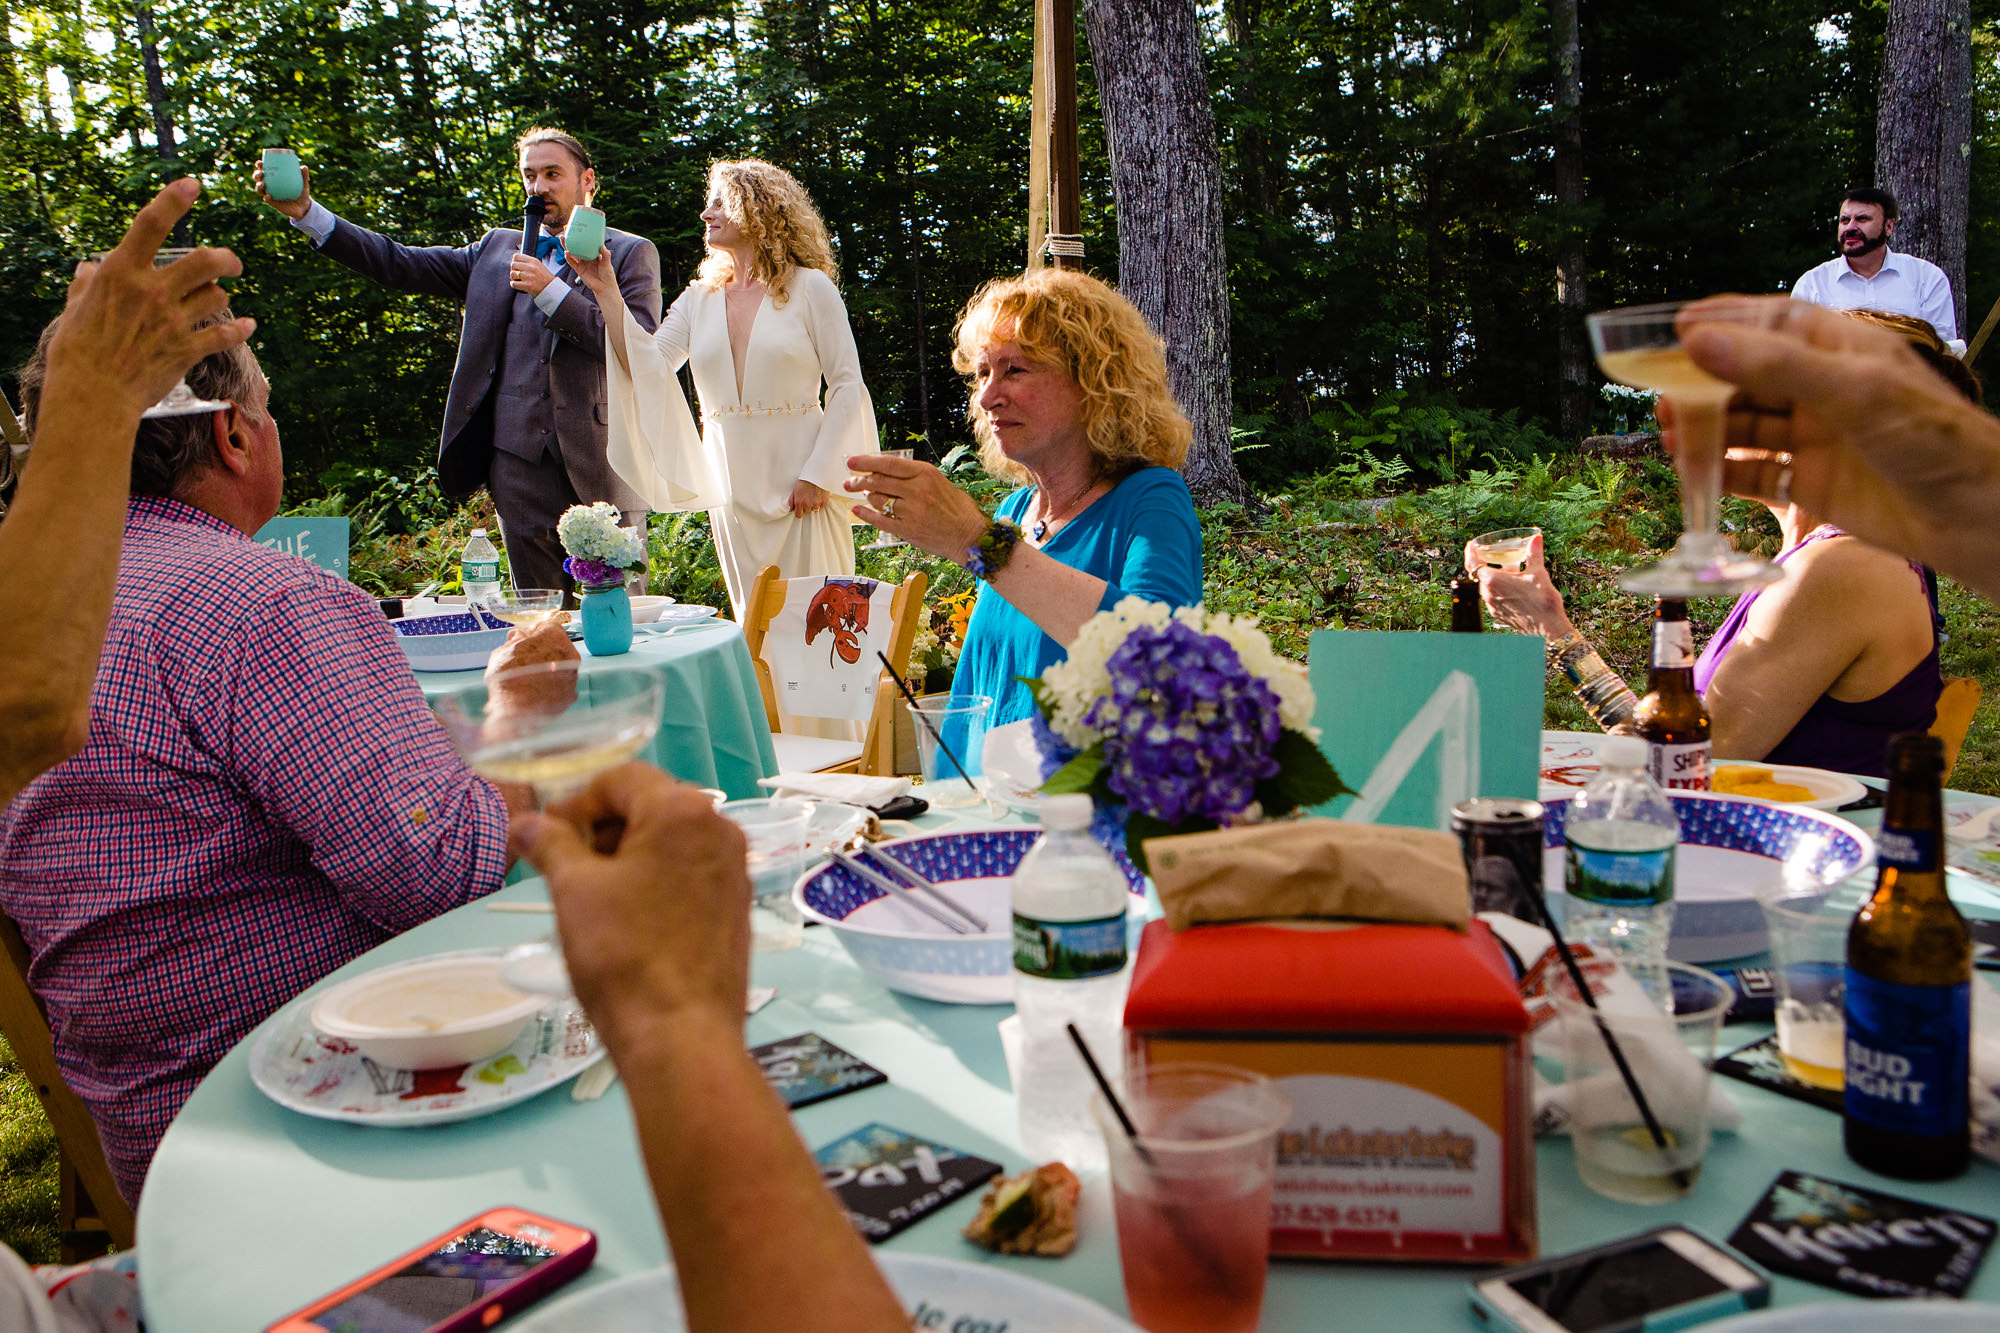 The bride and groom toast to their friends and family at their private residence wedding in Maine